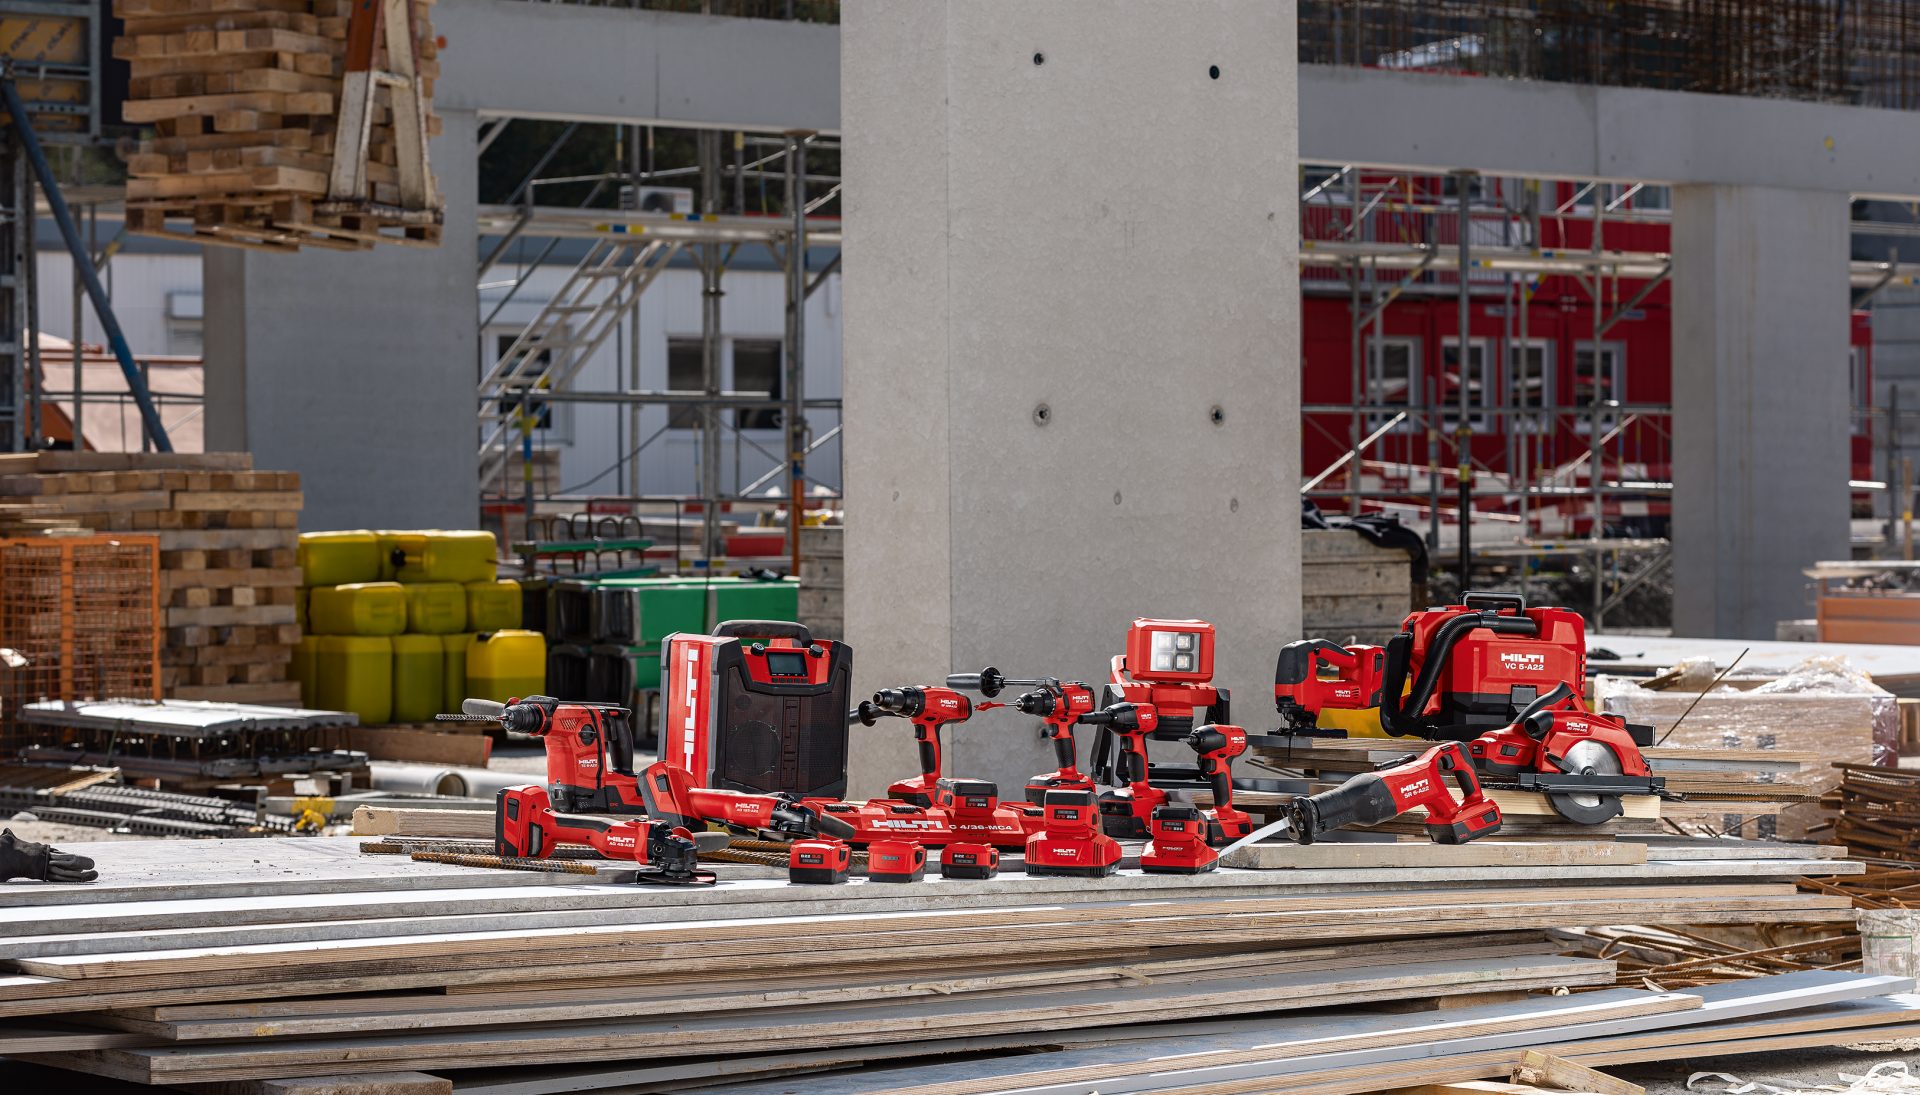 Hilti introduces the new range of B22 batteries